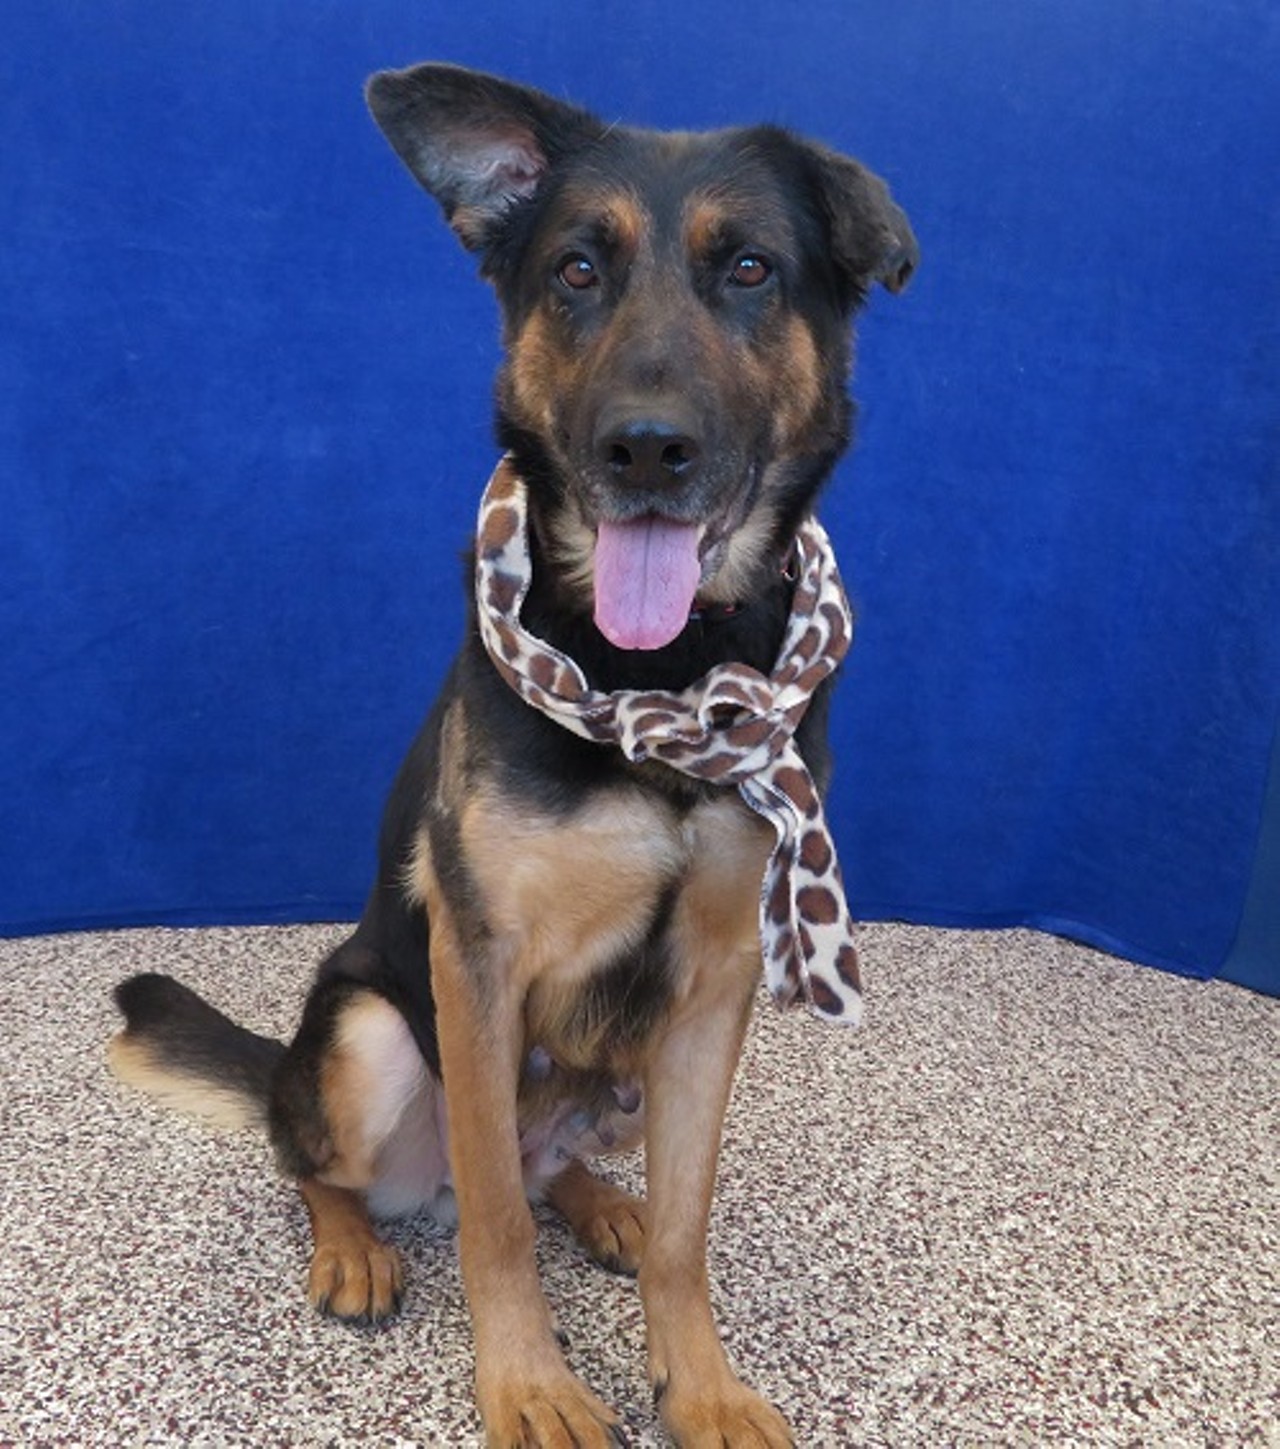 NAME: Frostine
GENDER: Female
BREED: German Shepherd
AGE: 2 years, 7 months
WEIGHT: 66 pounds
SPECIAL CONSIDERATIONS: None
REASON I CAME TO MHS: Neglected in Detroit
LOCATION: Mackey Center for Animal Care in Detroit
ID NUMBER: 860933